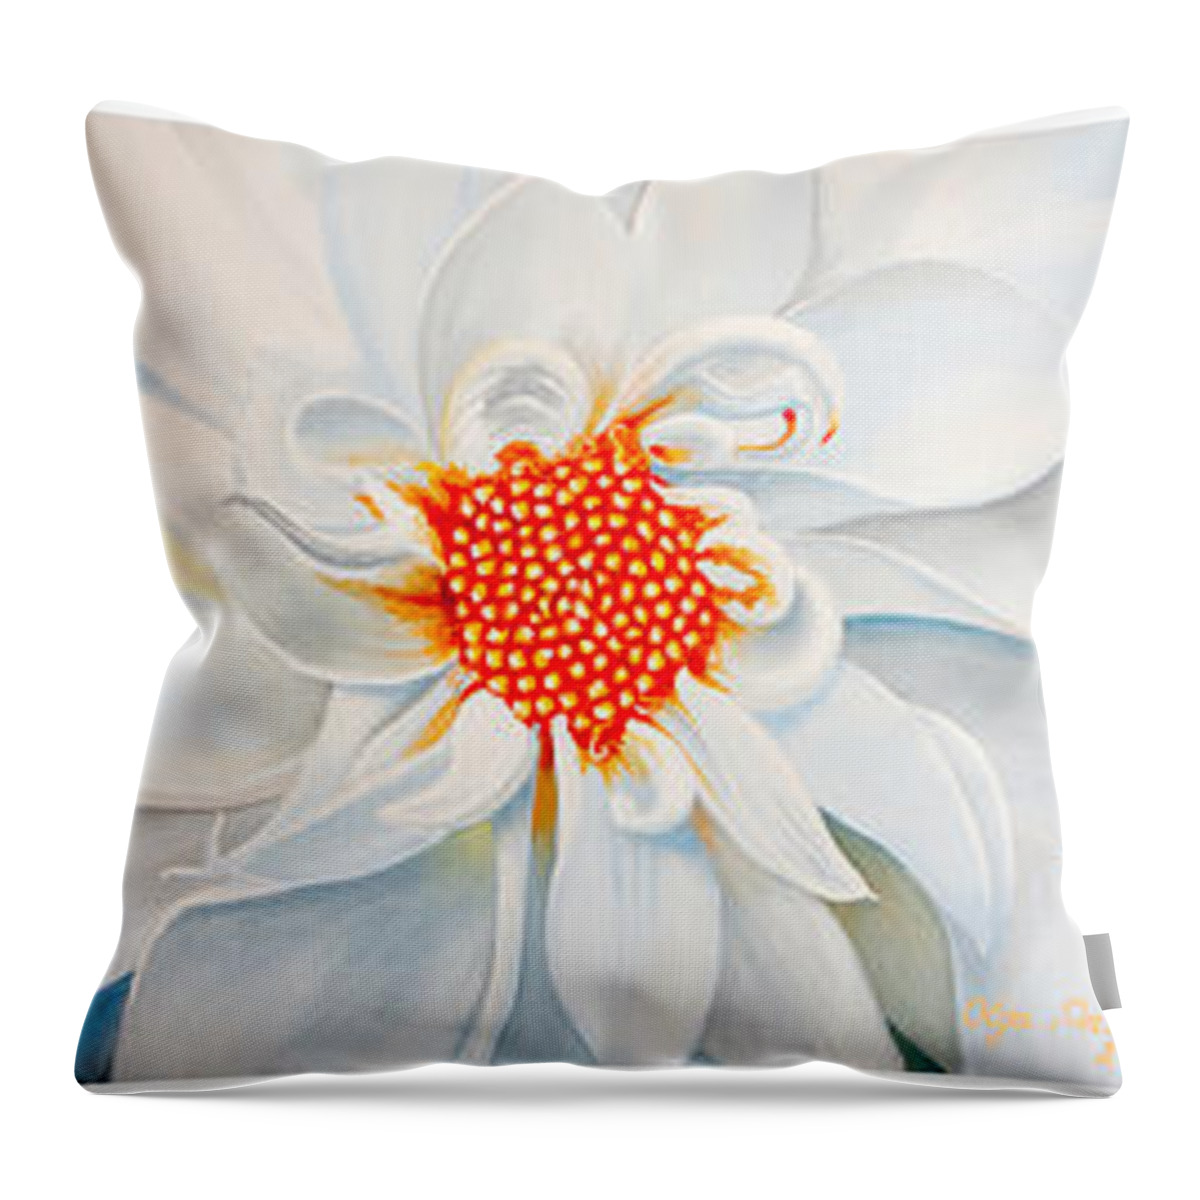 Dahlias Throw Pillow featuring the painting Pink White and Red by Olga Smith